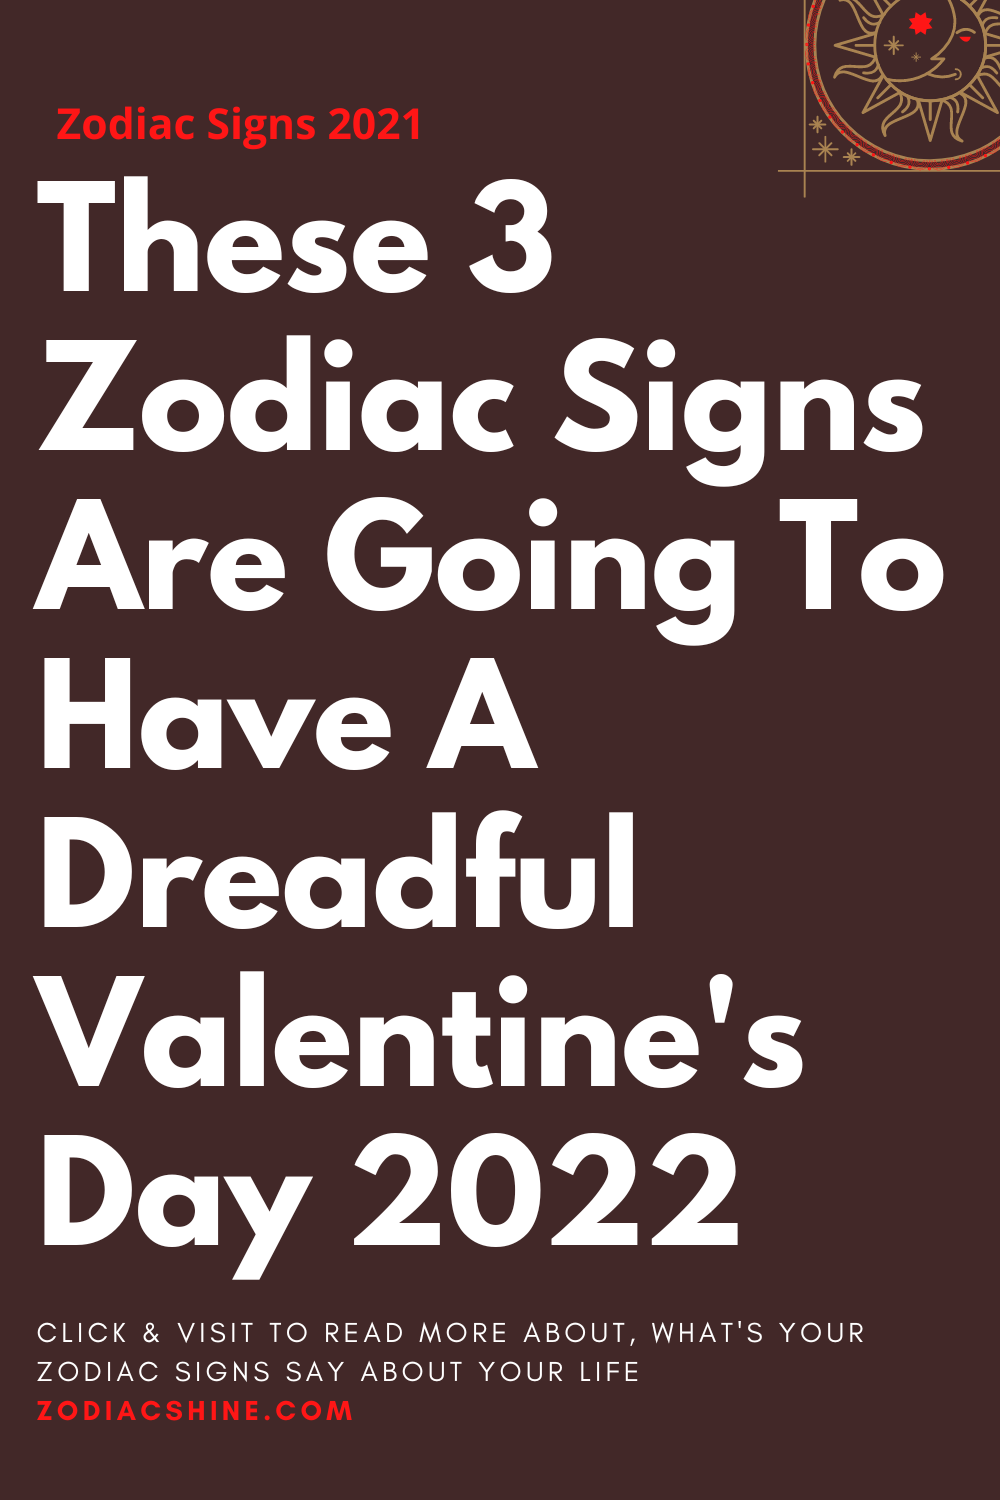 These 3 Zodiac Signs Are Going To Have A Dreadful Valentine's Day 2022